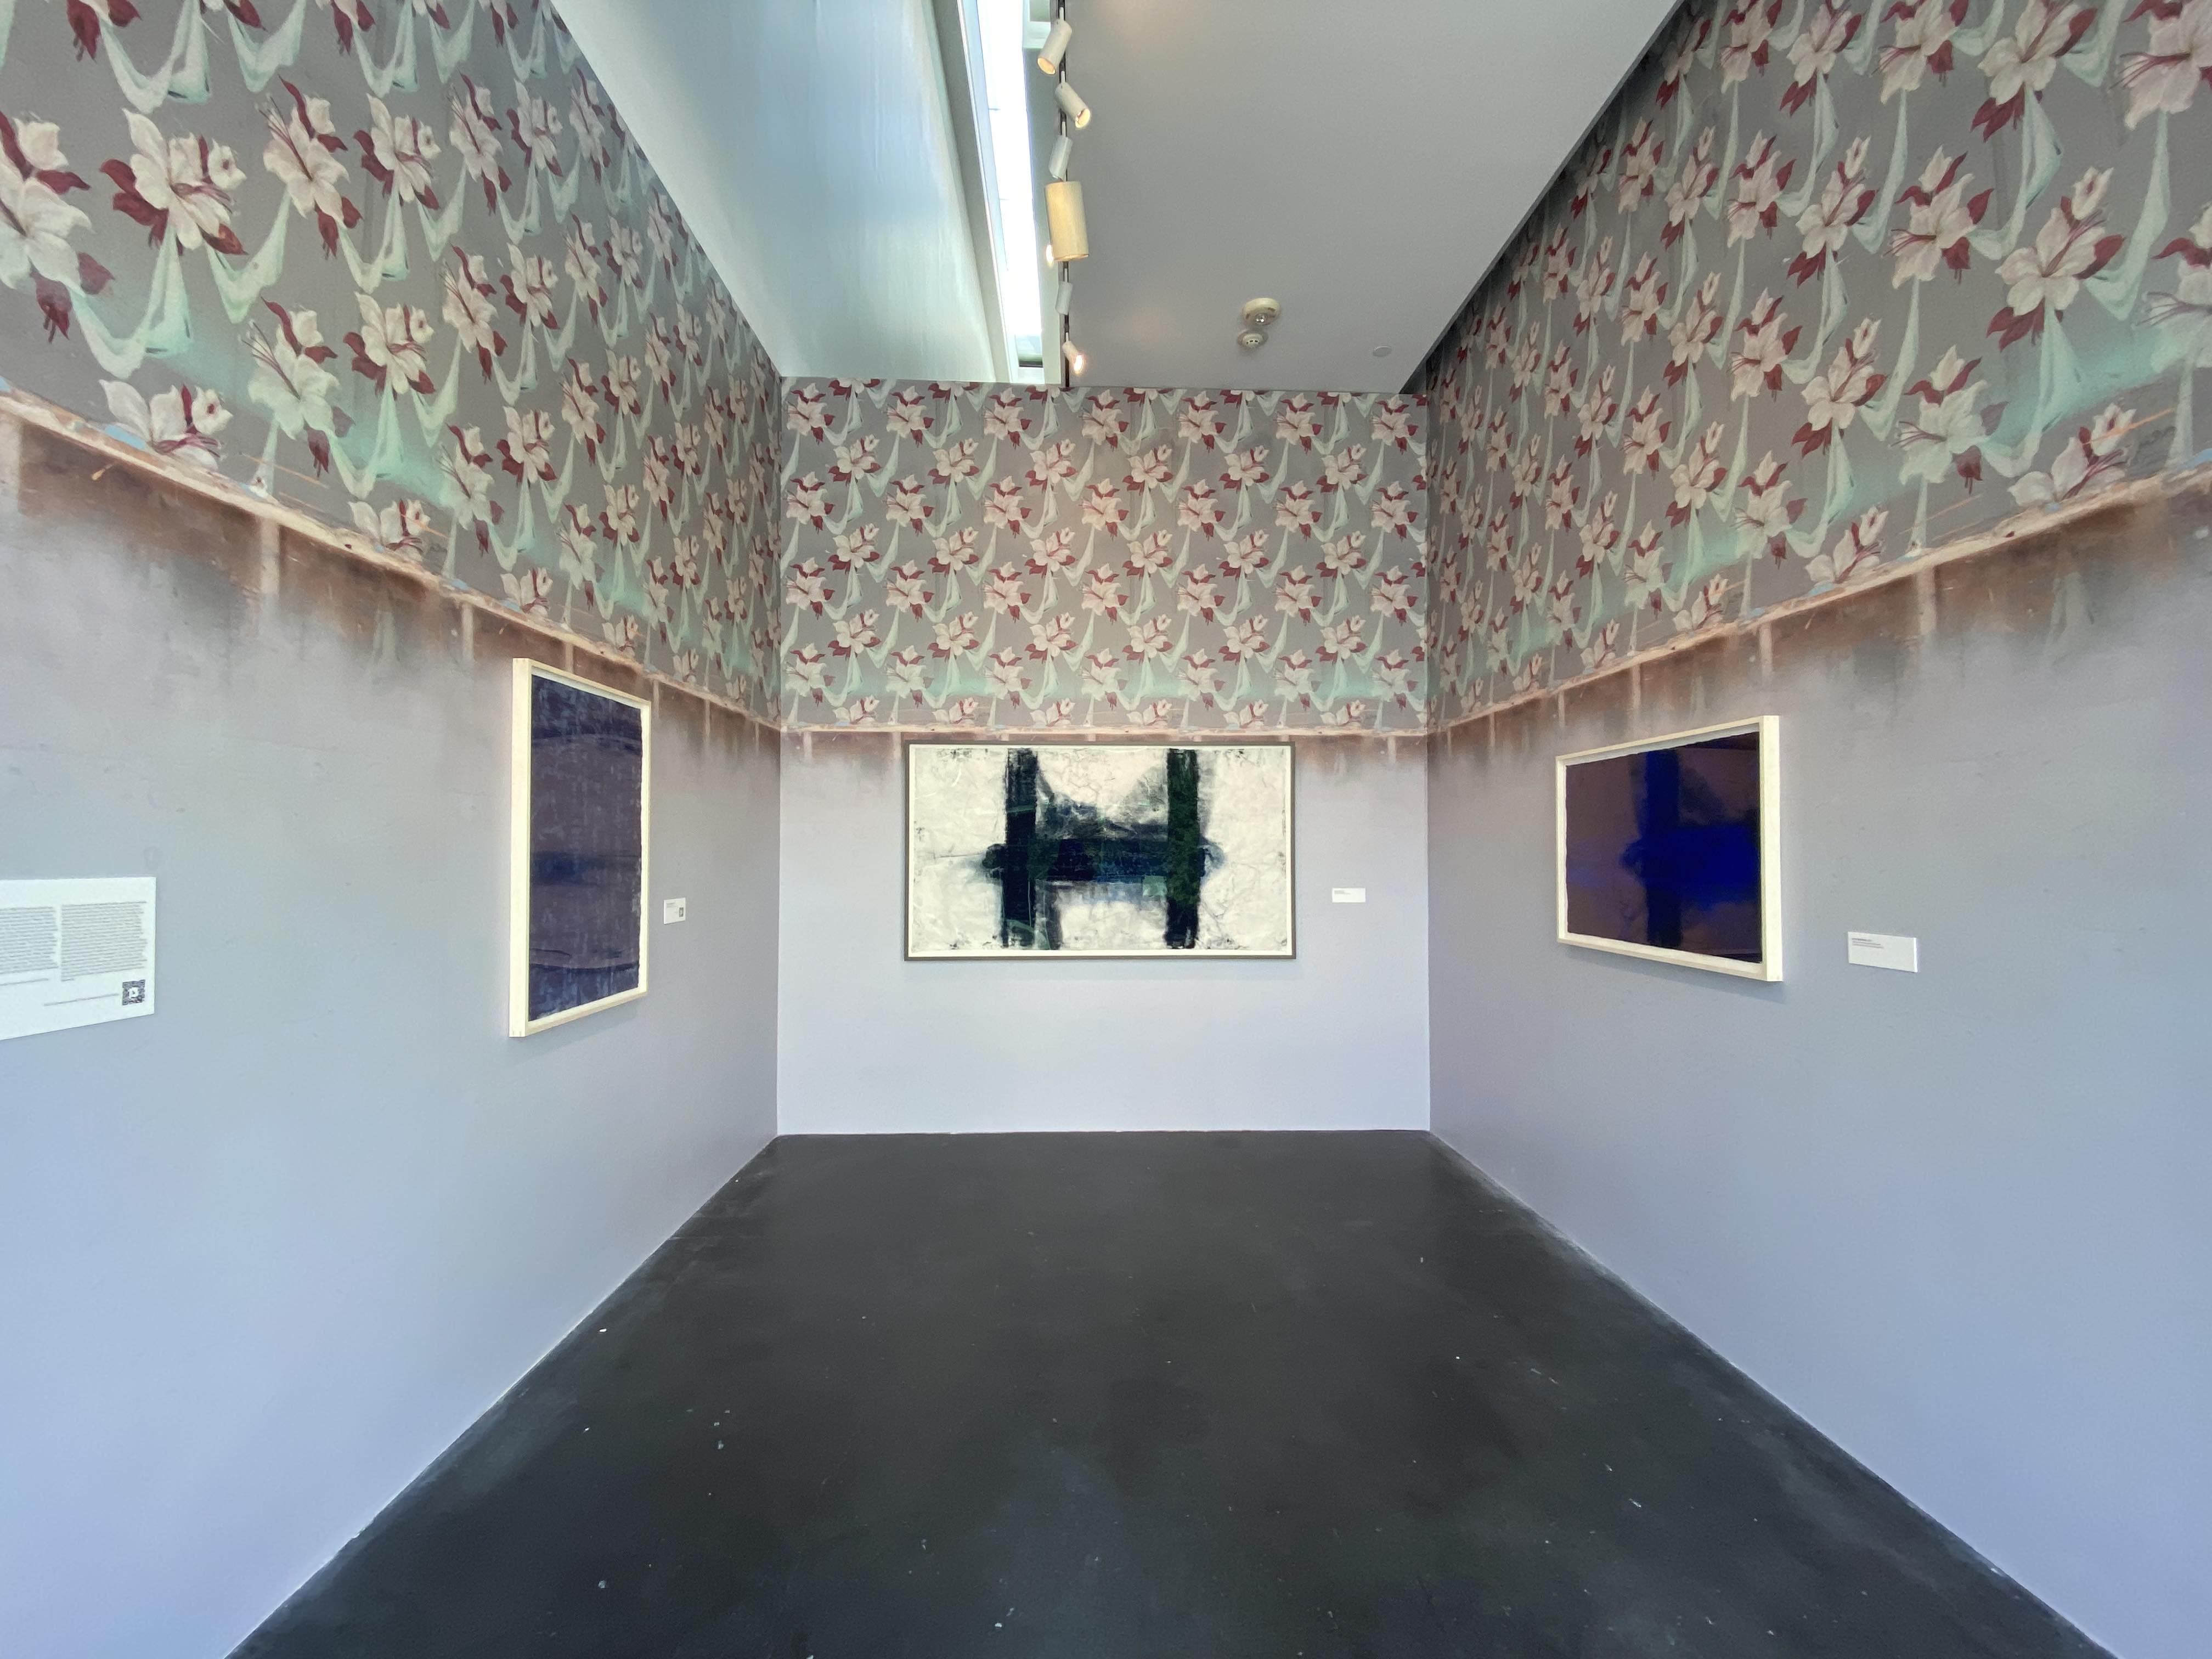 [Image description: A photograph of a small gallery in MCA Denver. All three walls are lined with weathered wallpaper with white flowers and light teal cloth between them. On the walls are three paintings by Jason Moran.]